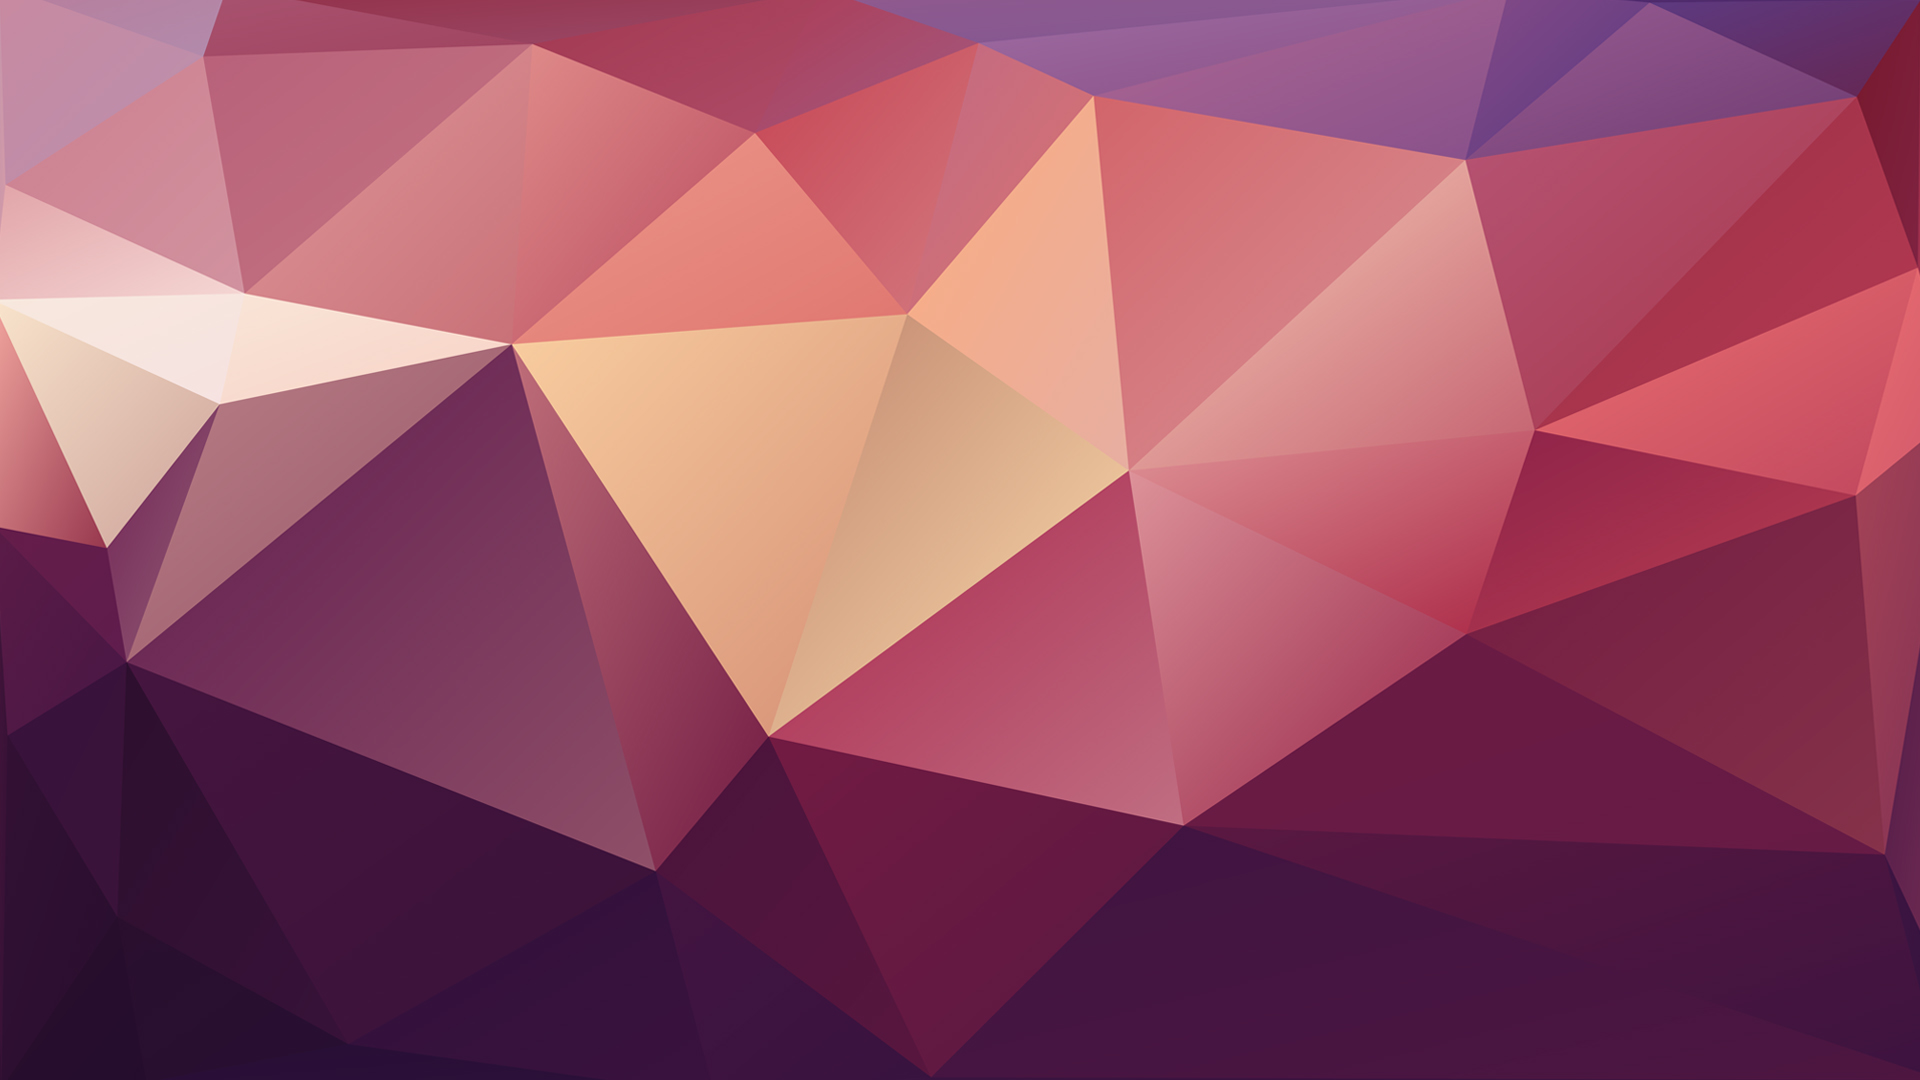 Abstract Geometric Low Poly   Wallpaper by McFrolic on